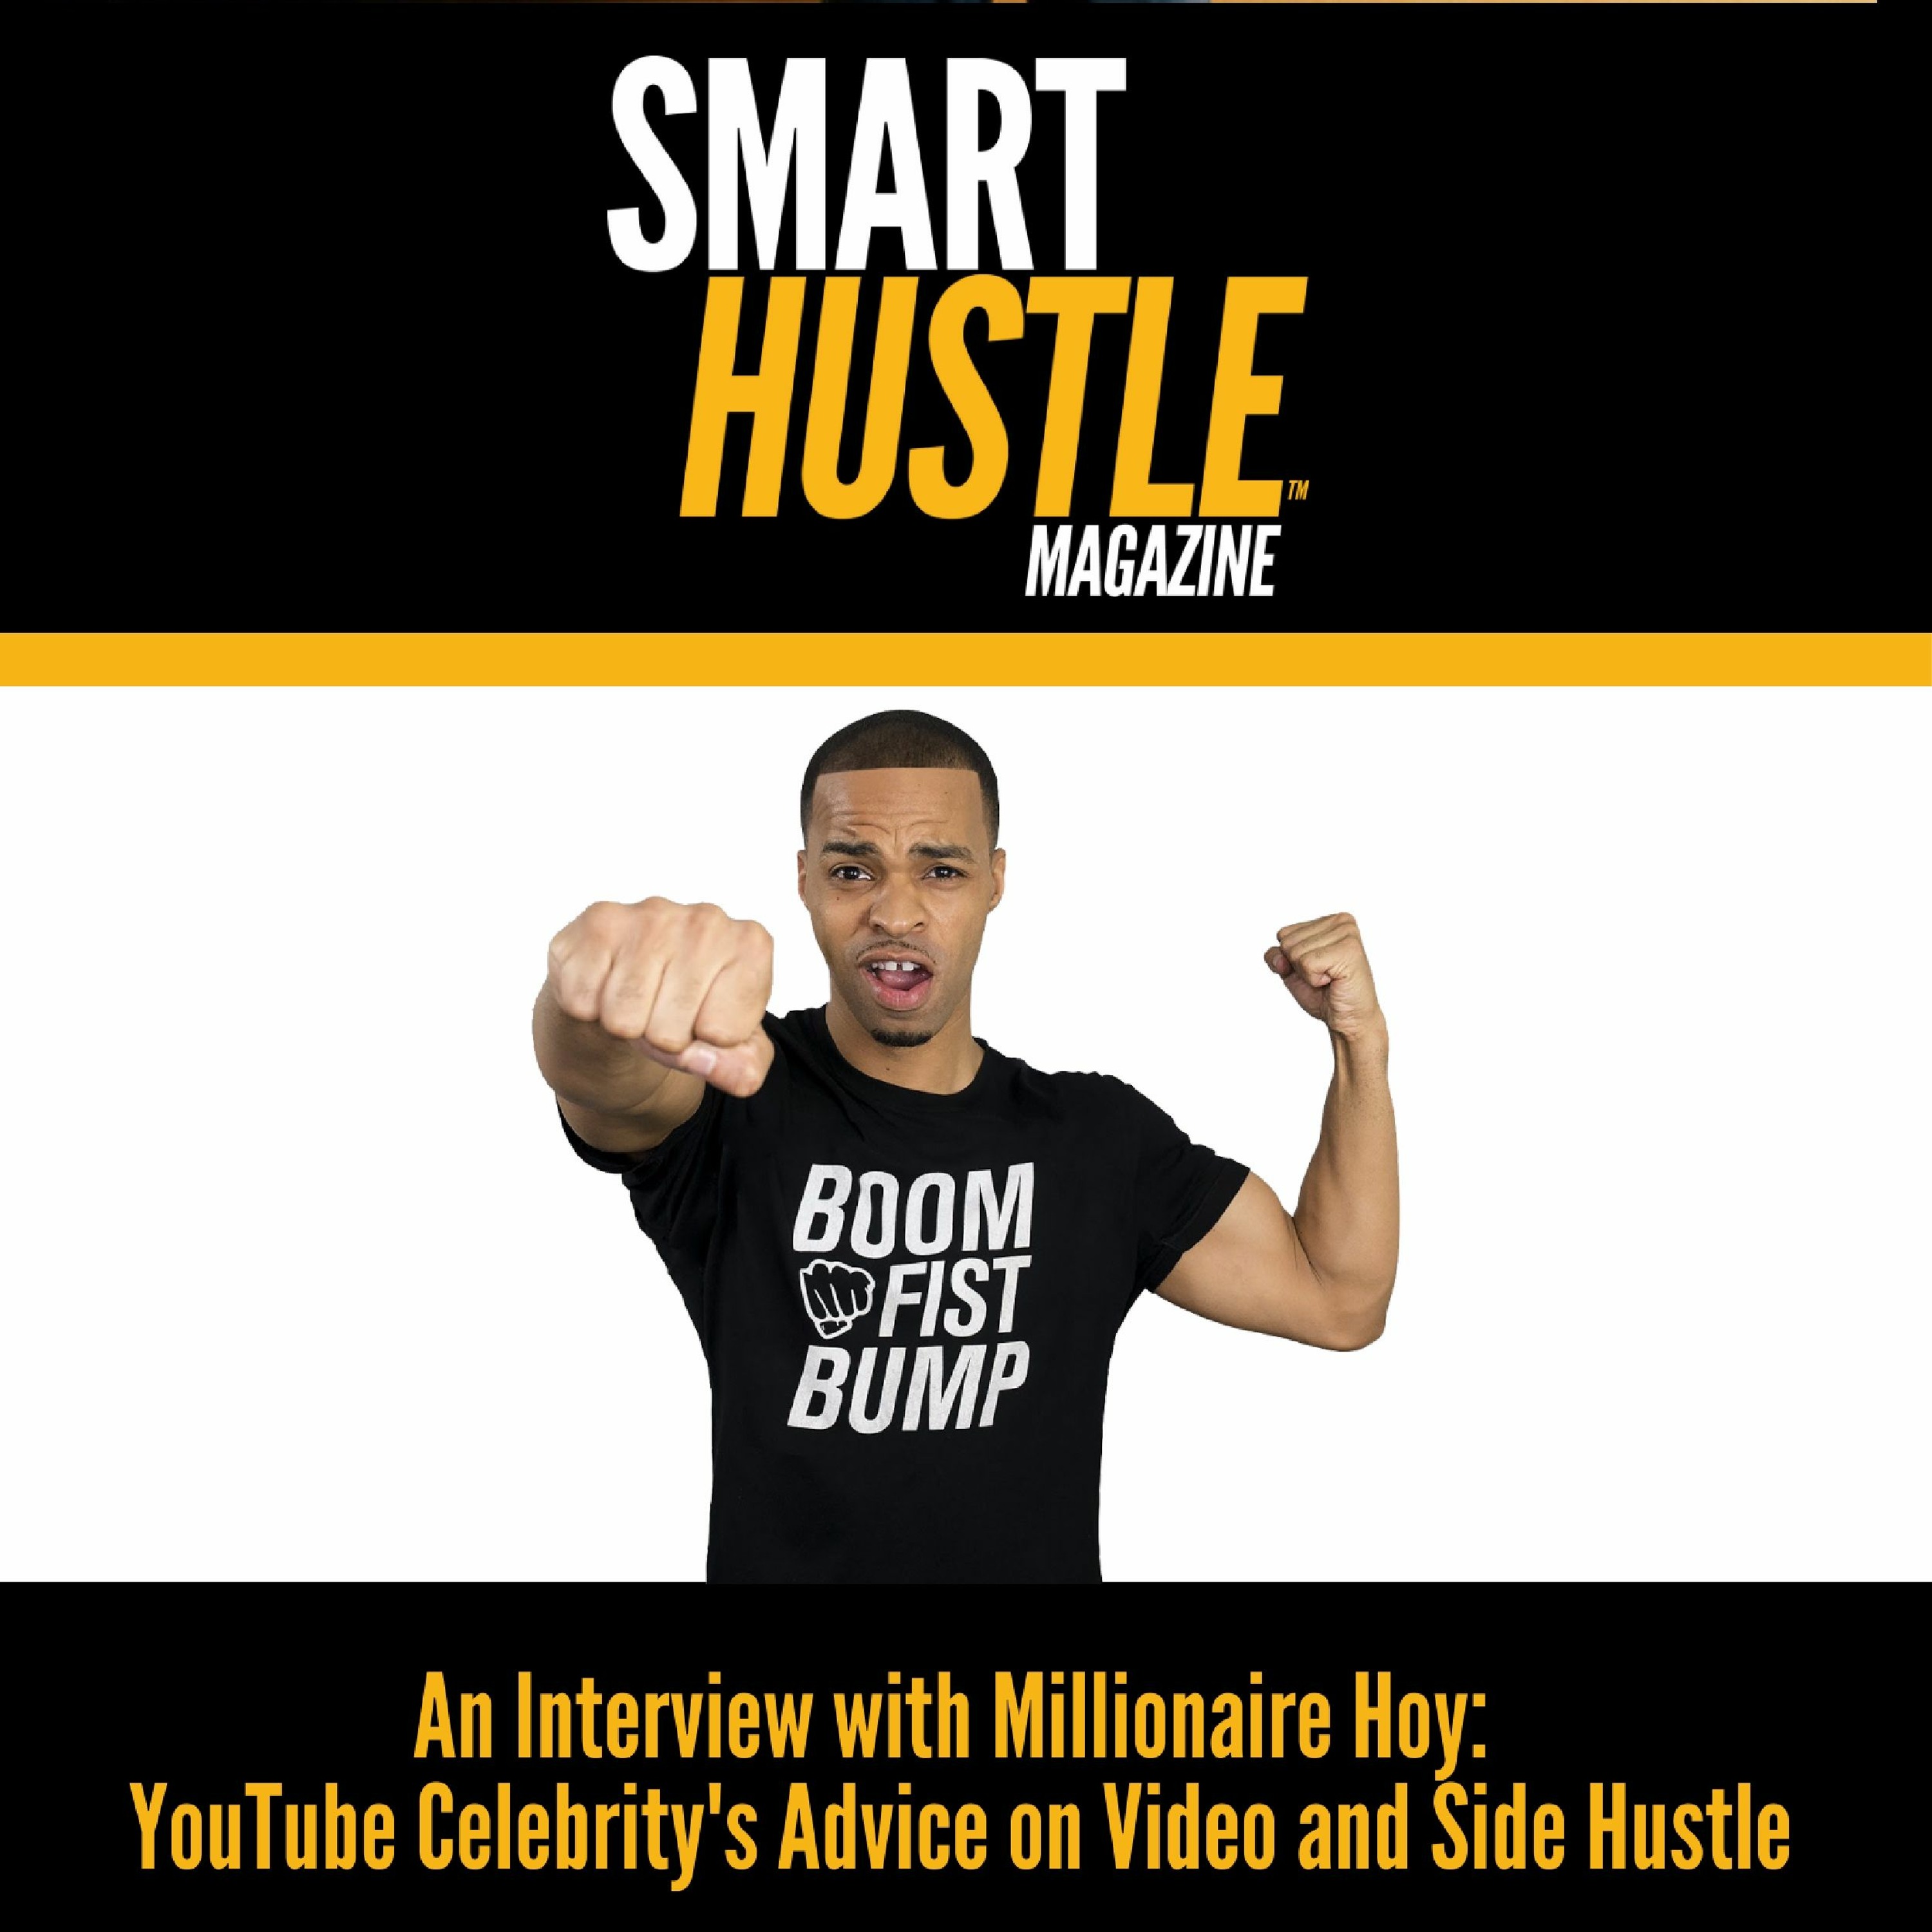 YouTube Celebrity's Advice on Video and Side Hustle: Millionaire Hoy